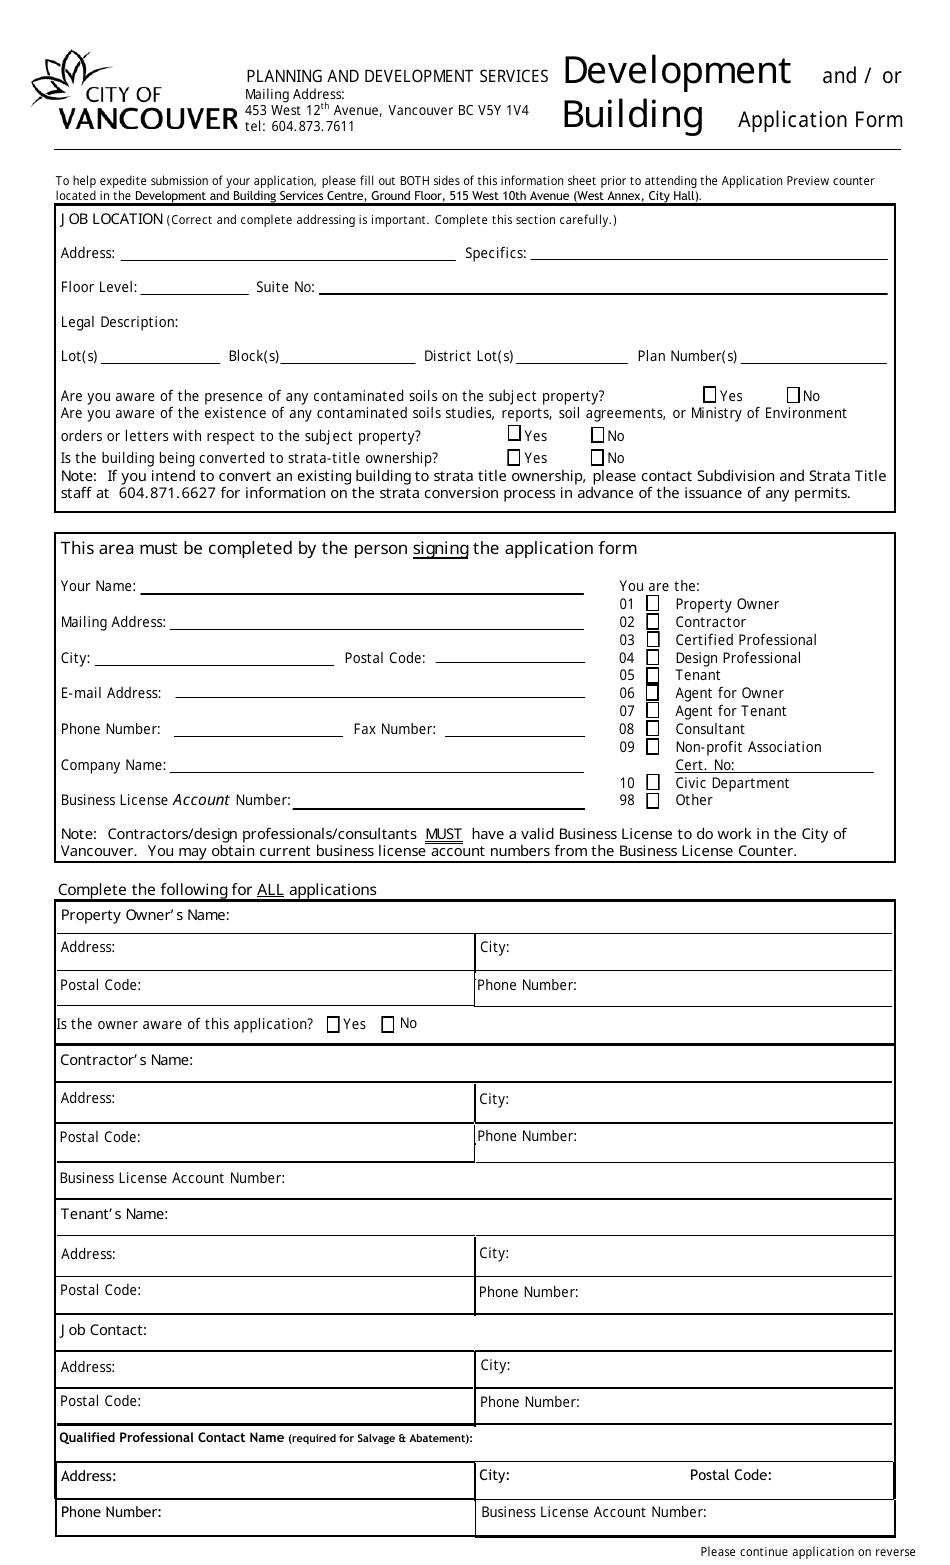 Form 081493 Development and / or Building Application Form - City of Vancouver, British Columbia, Canada, Page 1